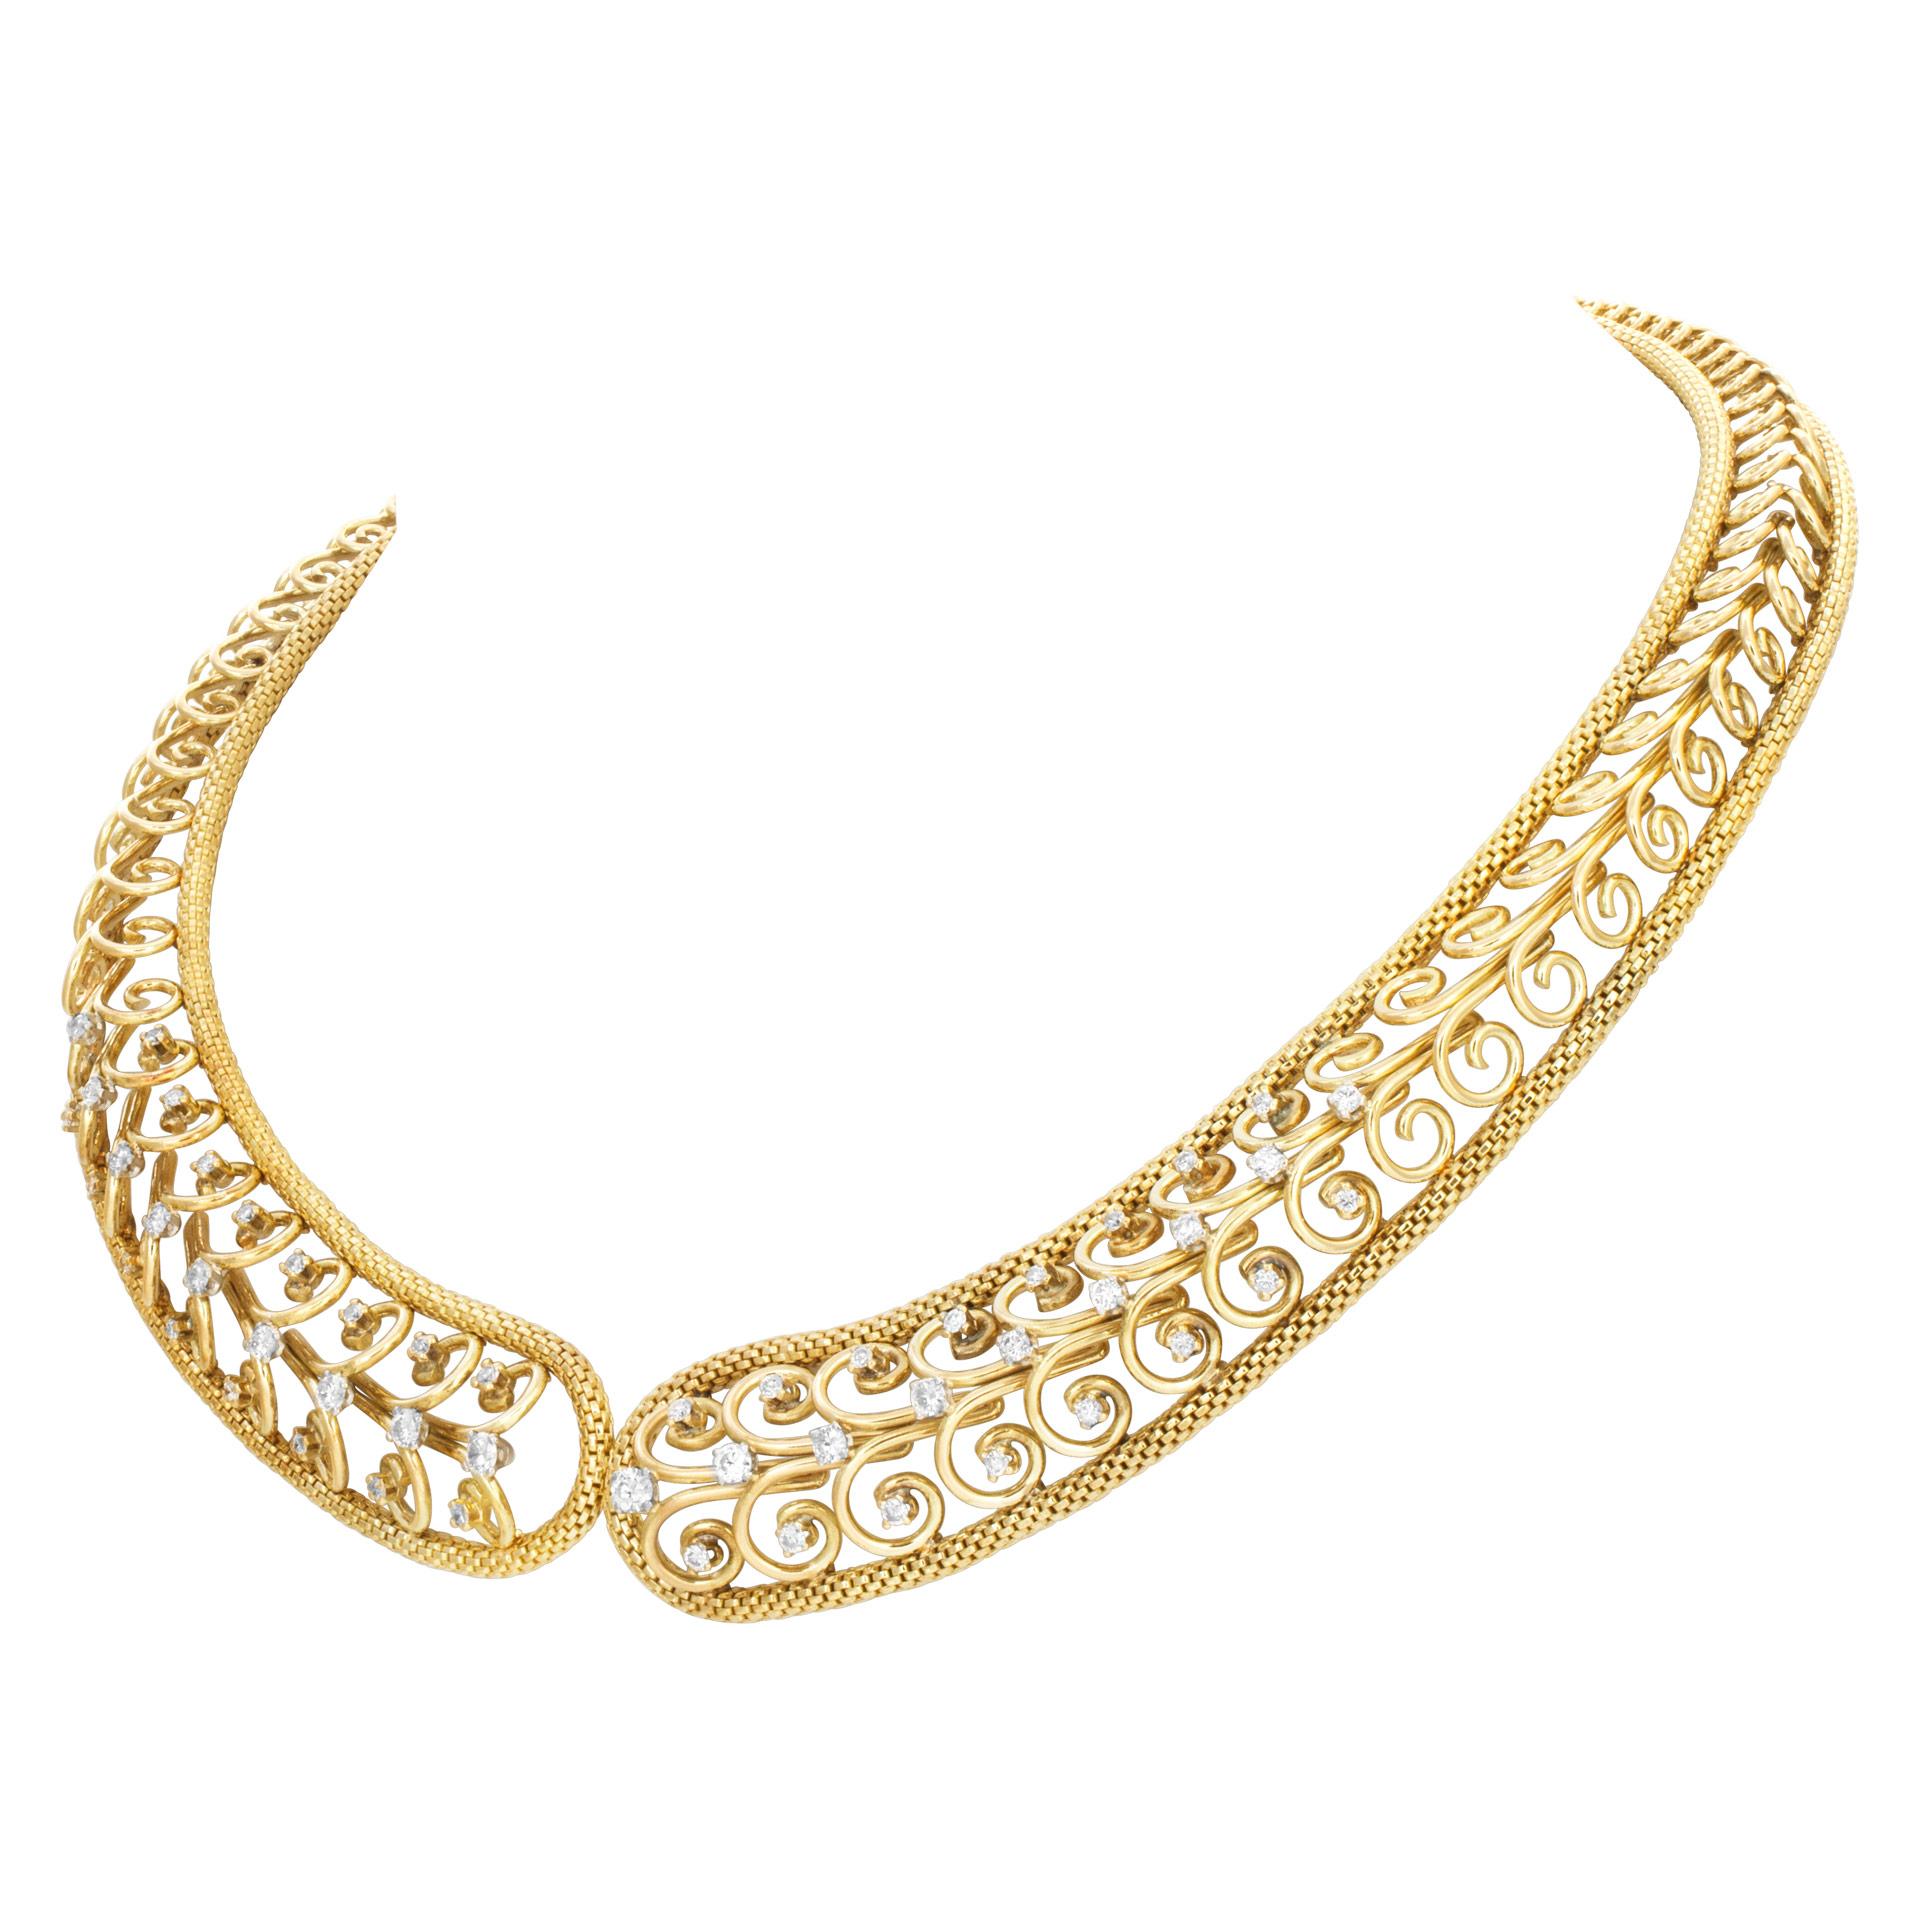 Women's Necklace with Diamond Accents in 18k Yellow Gold Swirl Link Choker For Sale